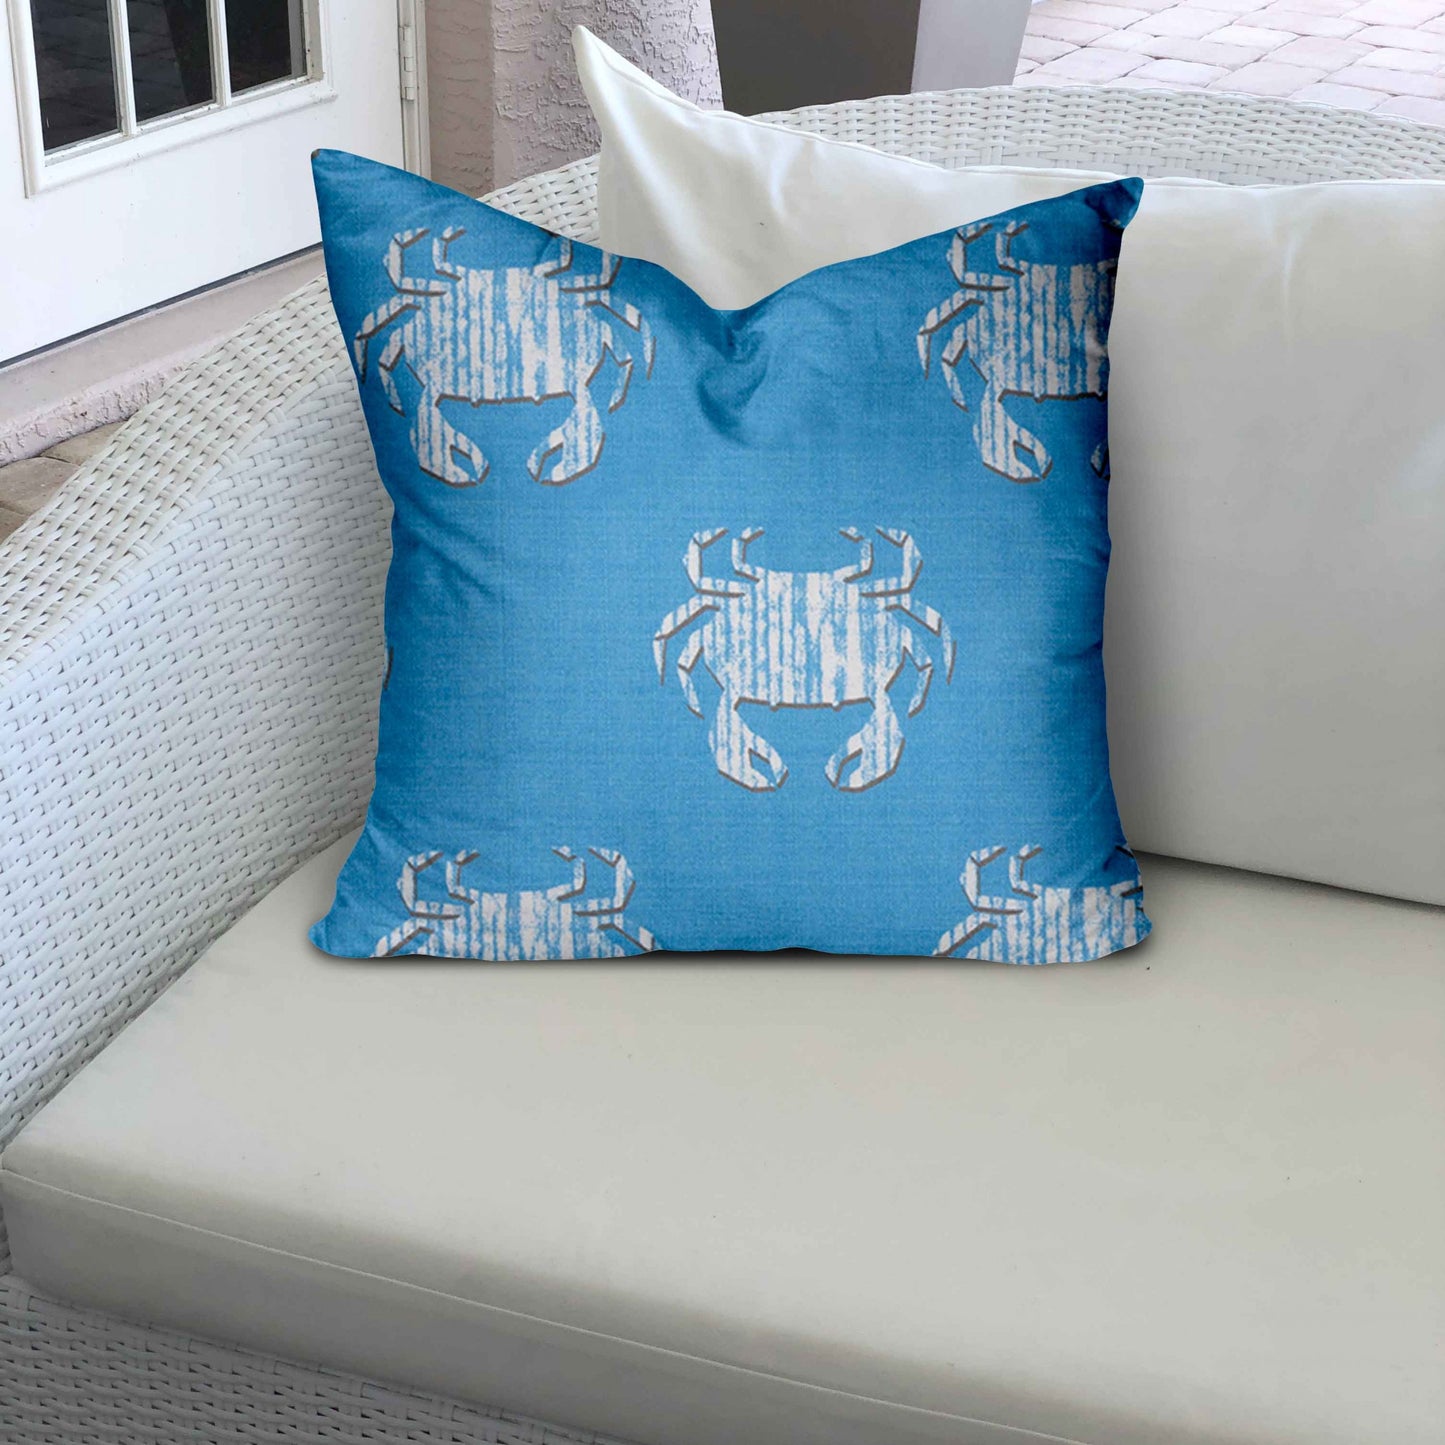 16" X 16" Blue And White Crab Enveloped Coastal Throw Indoor Outdoor Pillow